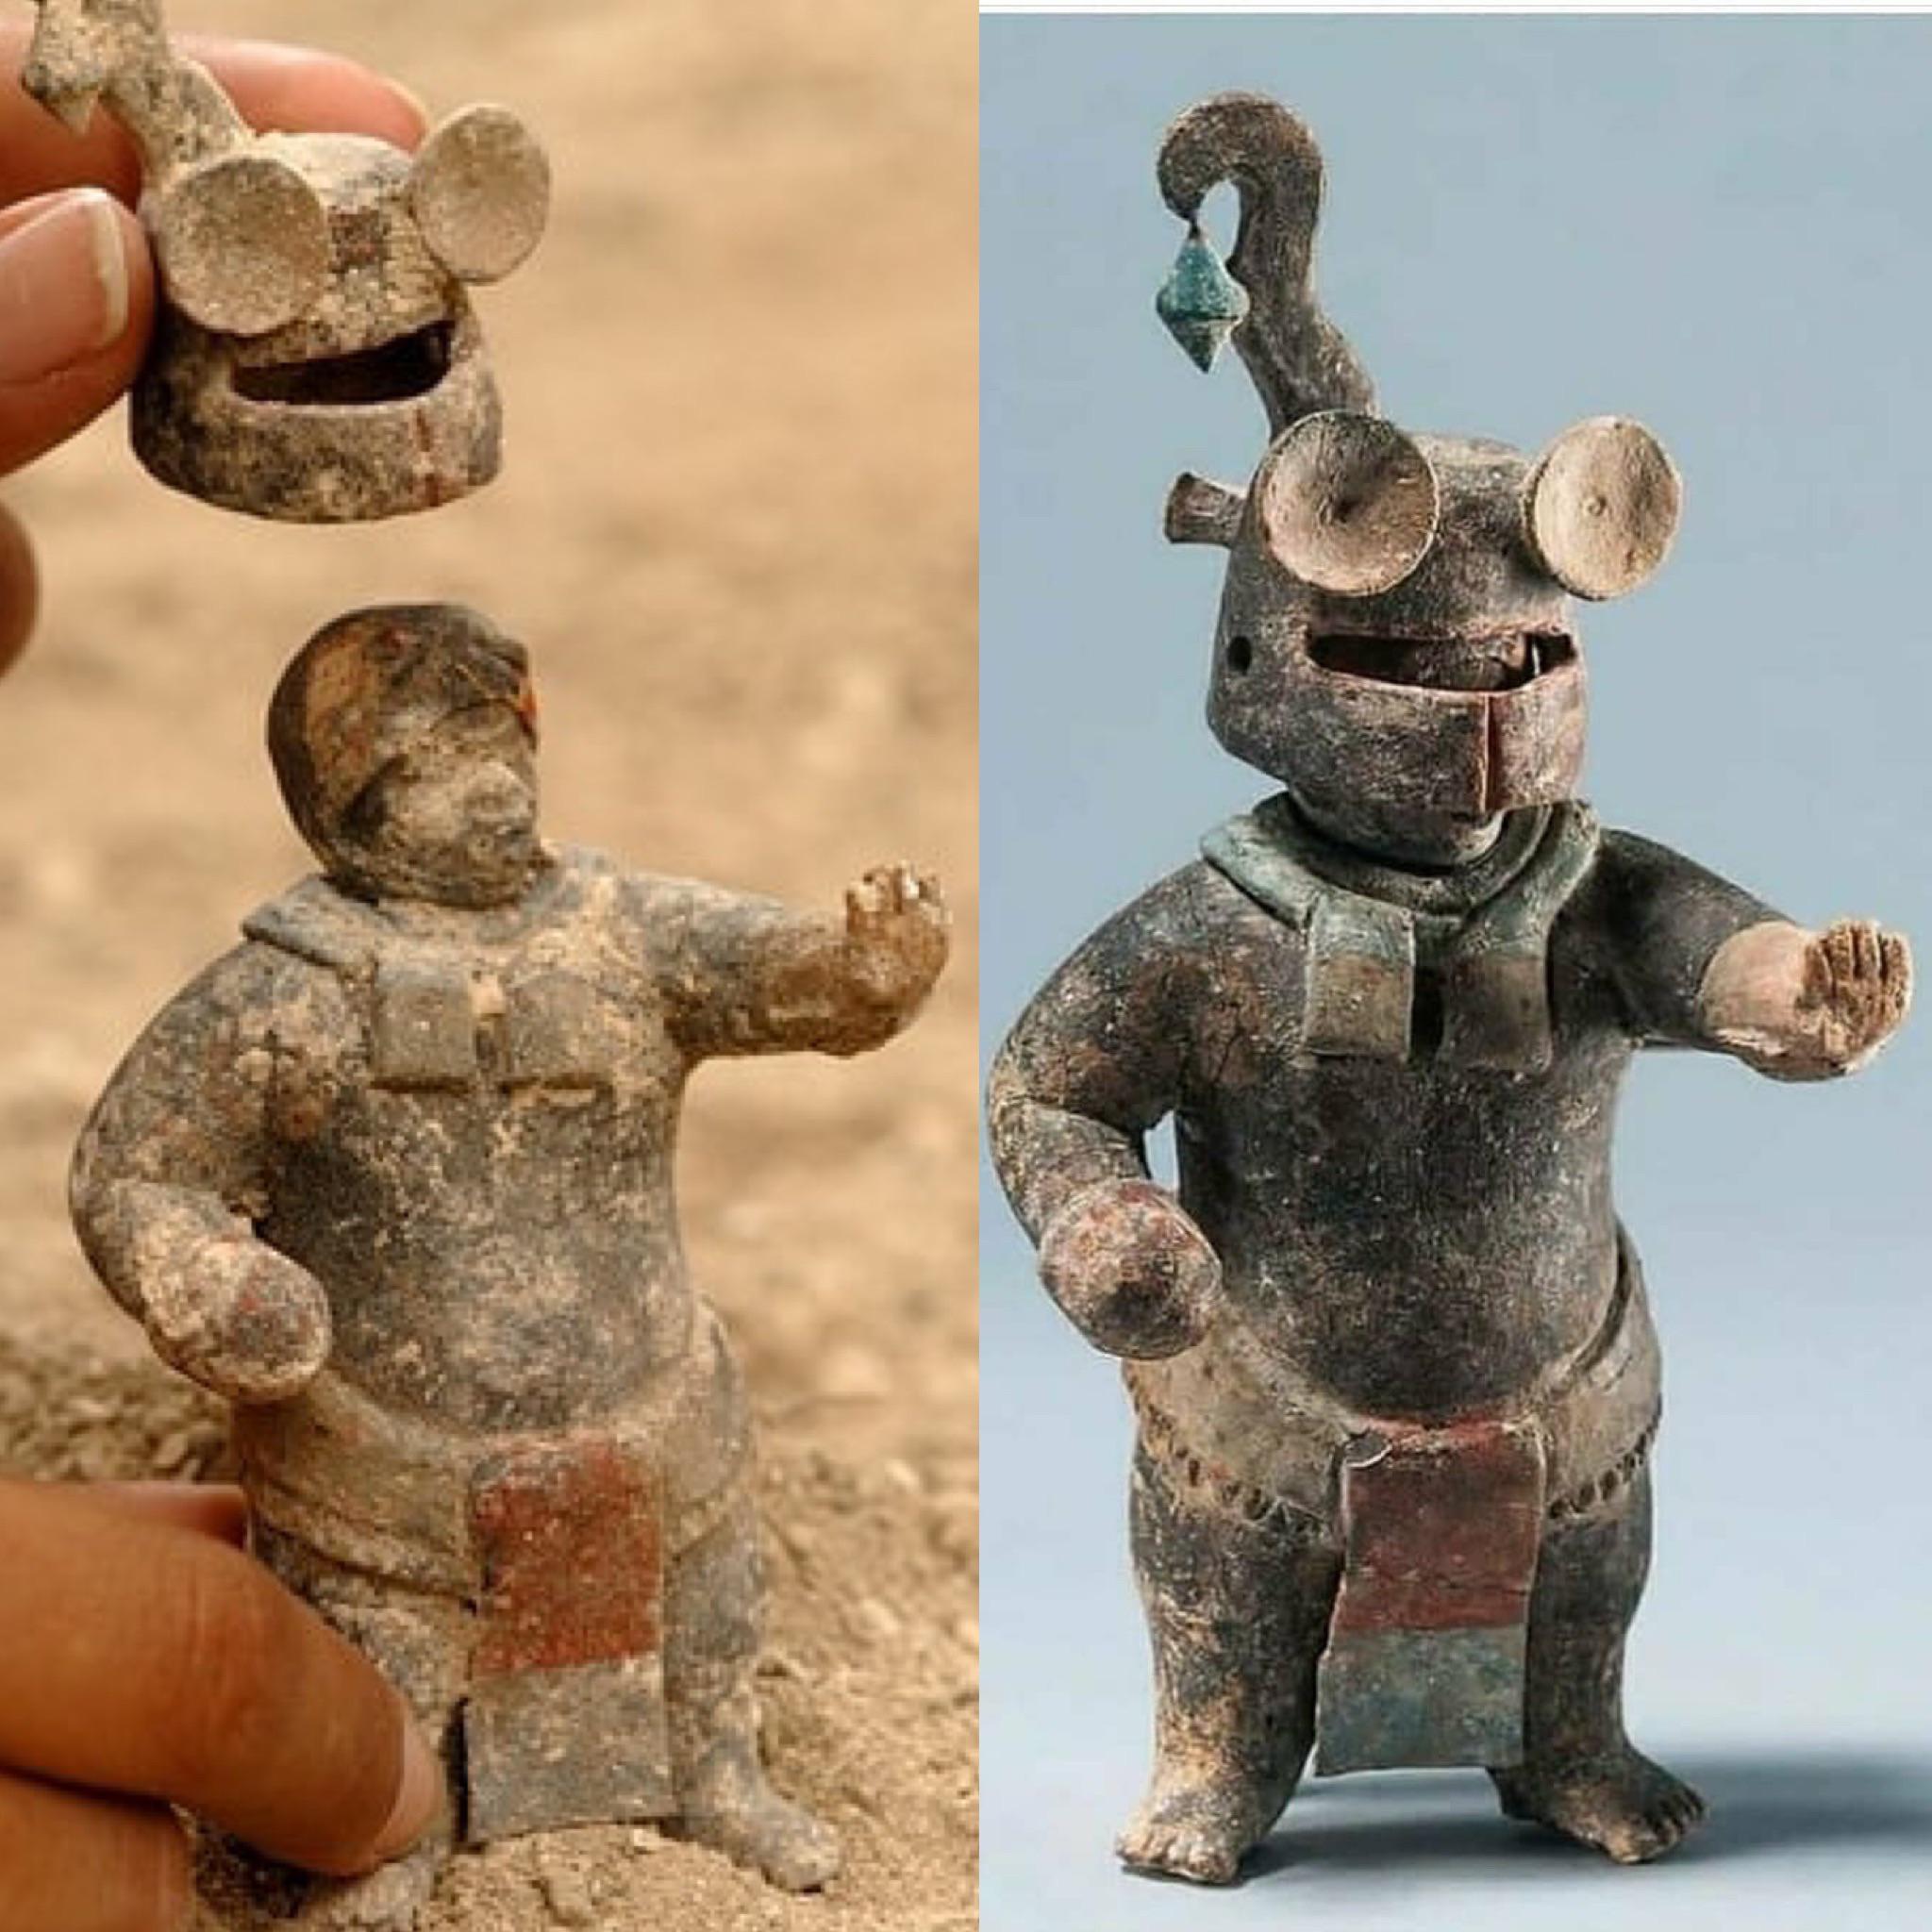 1,500-year-old Ceramic Maya Figurine With Removable Helmet,, 43% OFF